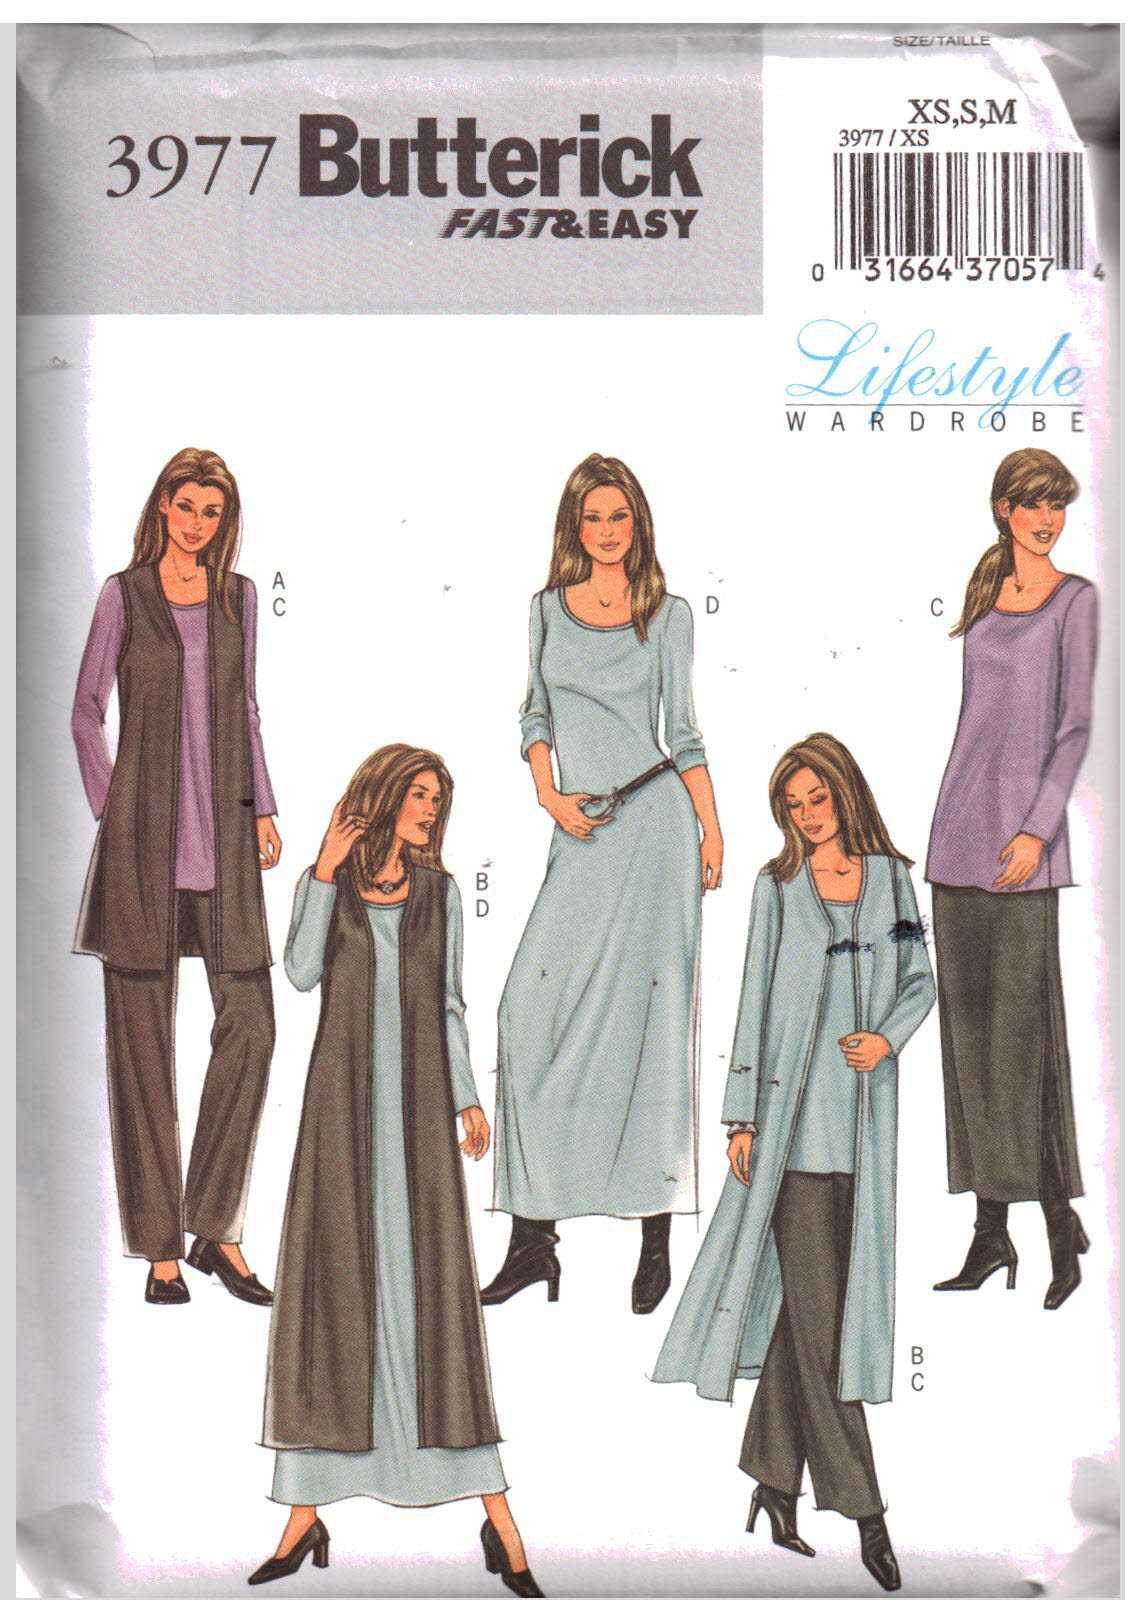 6308 New Look 2003 Sewing Pattern Juniors Six Sizes in One Skirts and Bag Sizes 34-1314  Uncut with Instructions